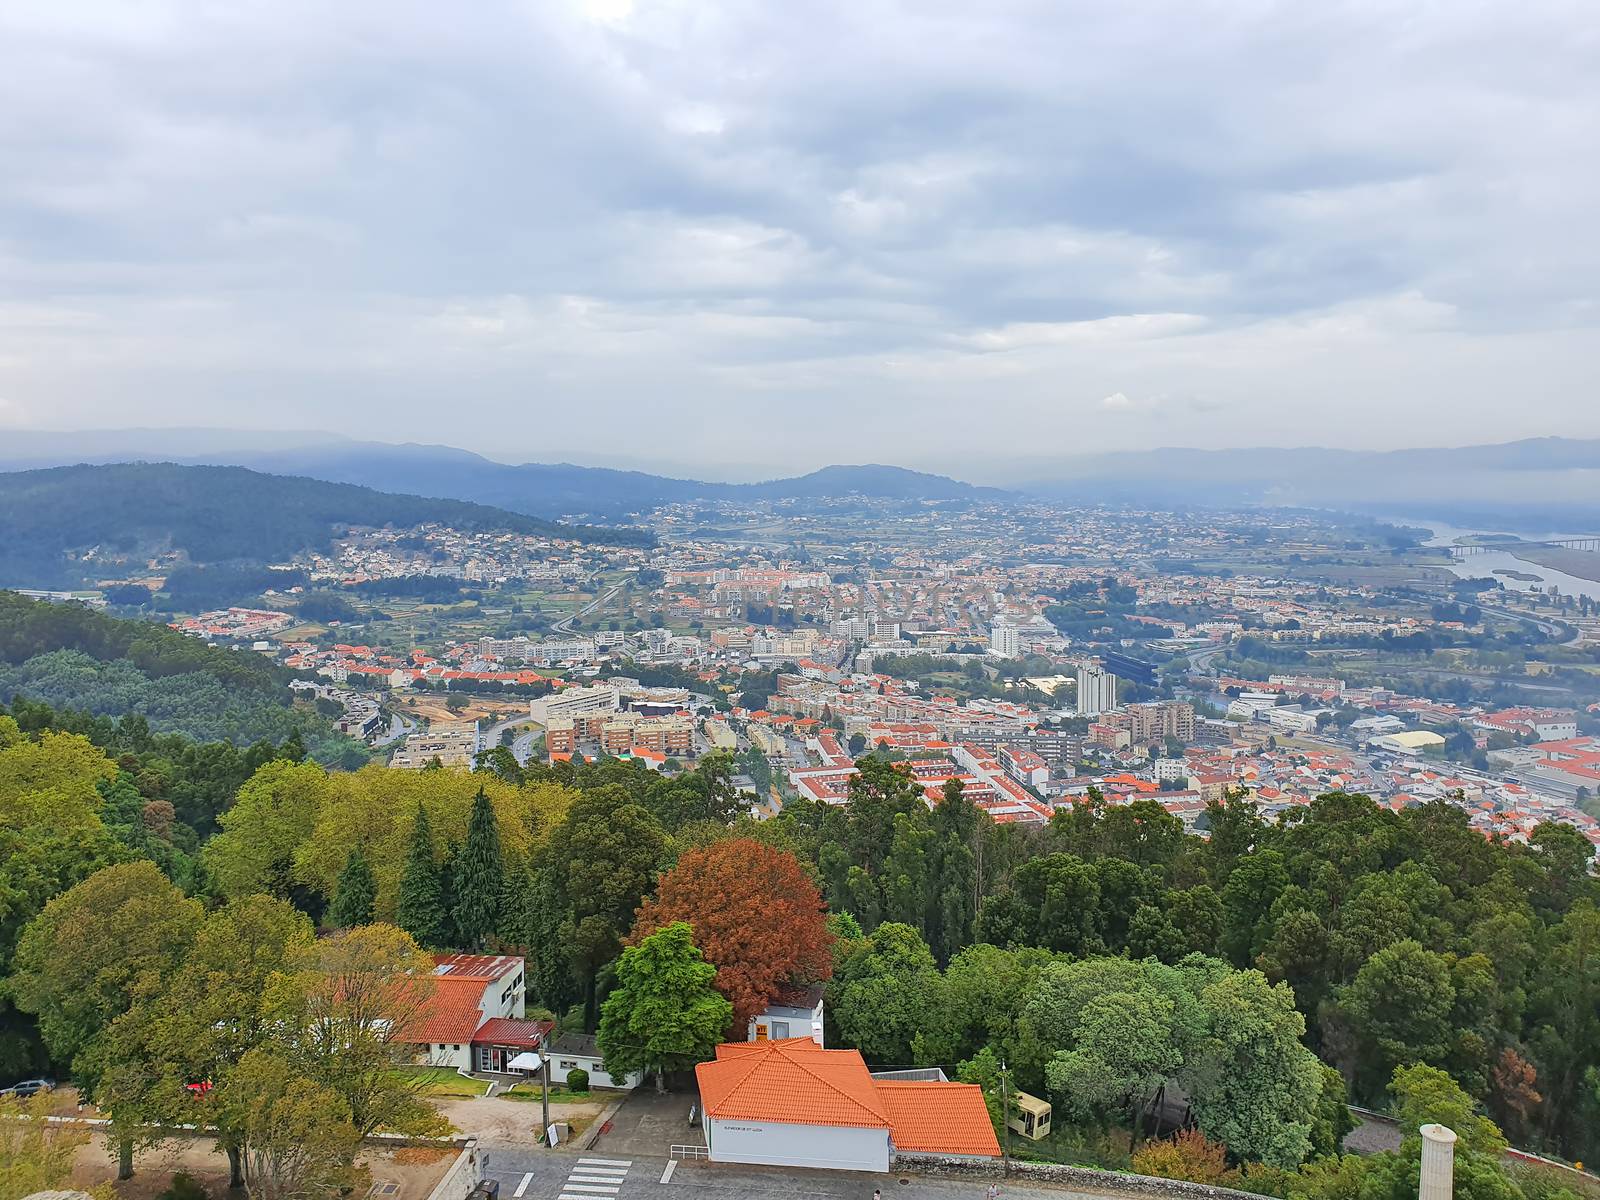 Panoramic view of Viano do Castelo and river, an important landmark in Portugal